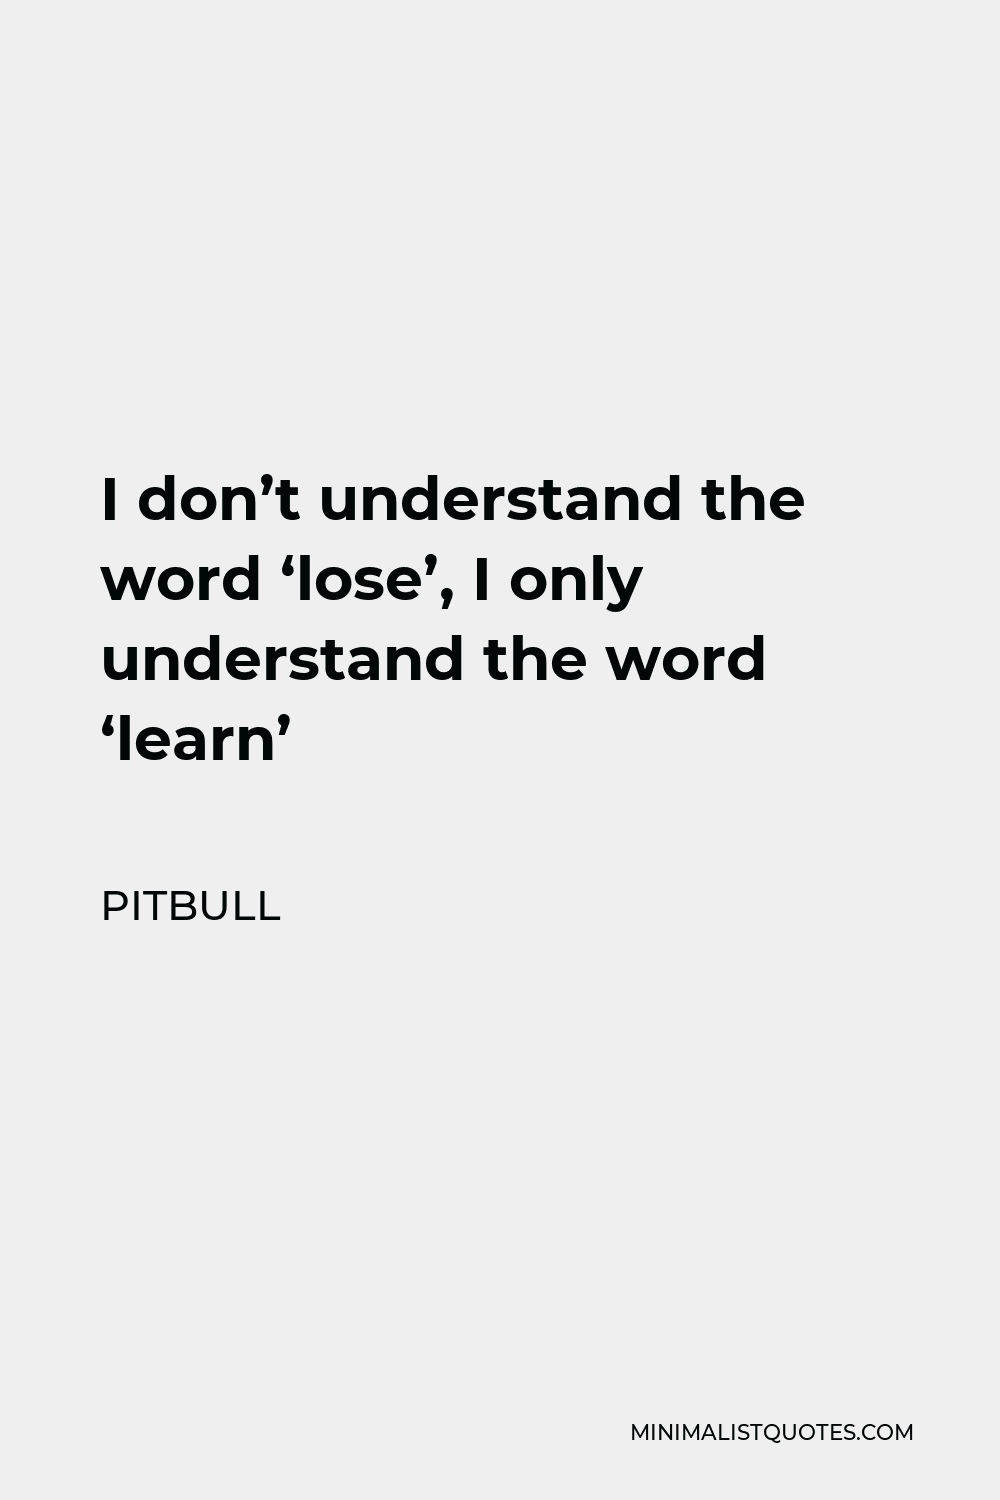 Pitbull Quote - I don’t understand the word ‘lose’, I only understand the word ‘learn’